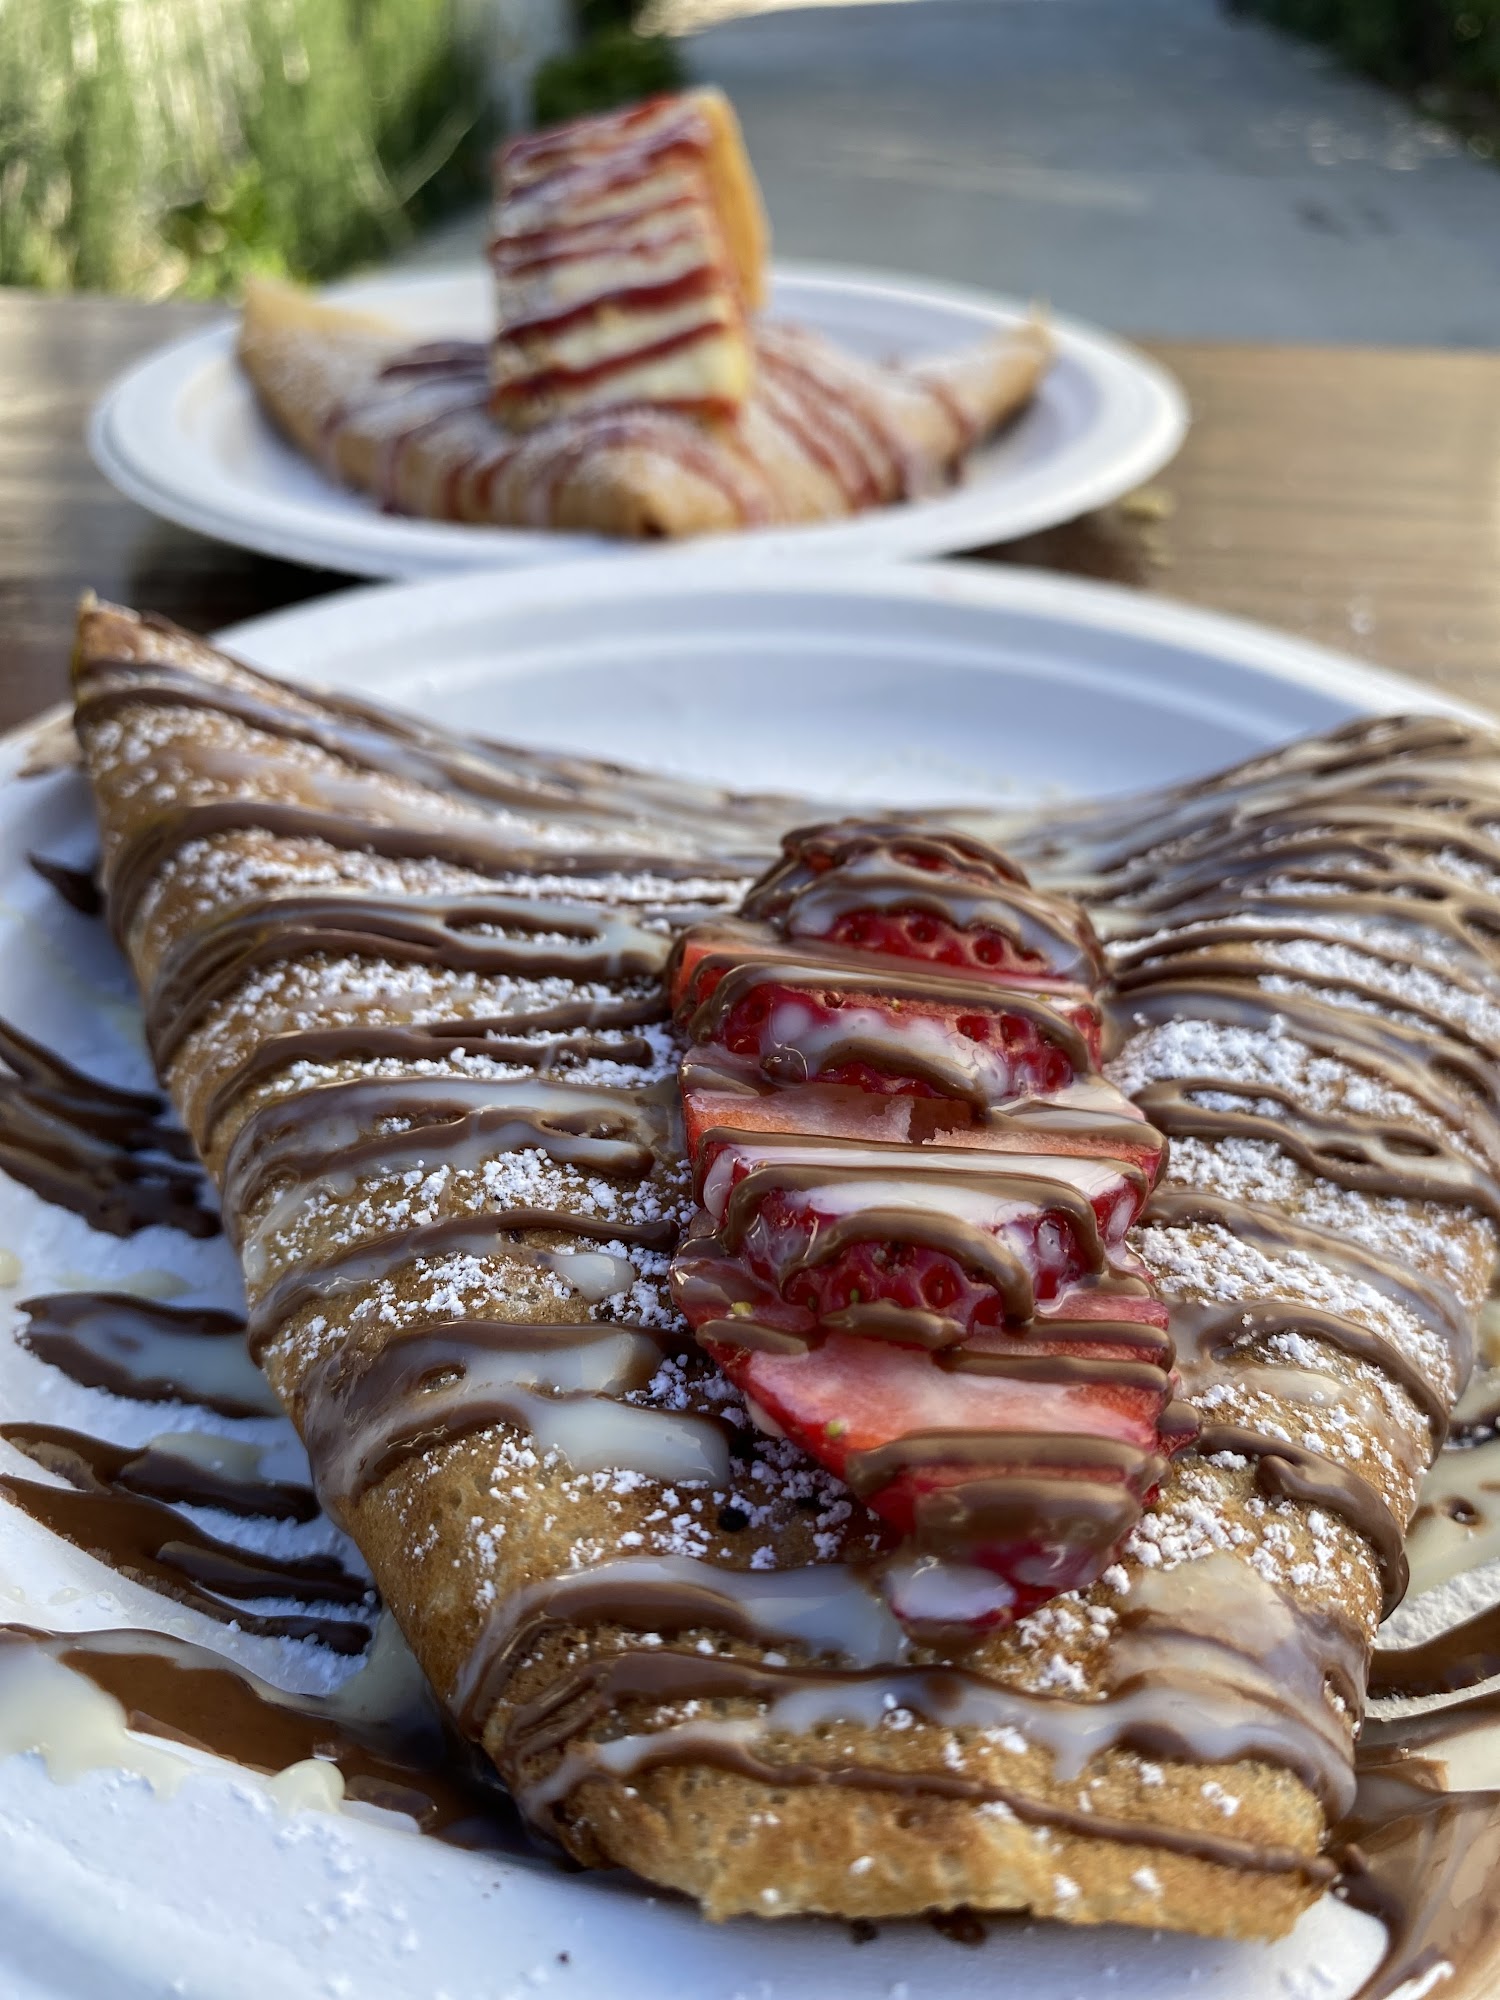 The santis crepes and funnel cake